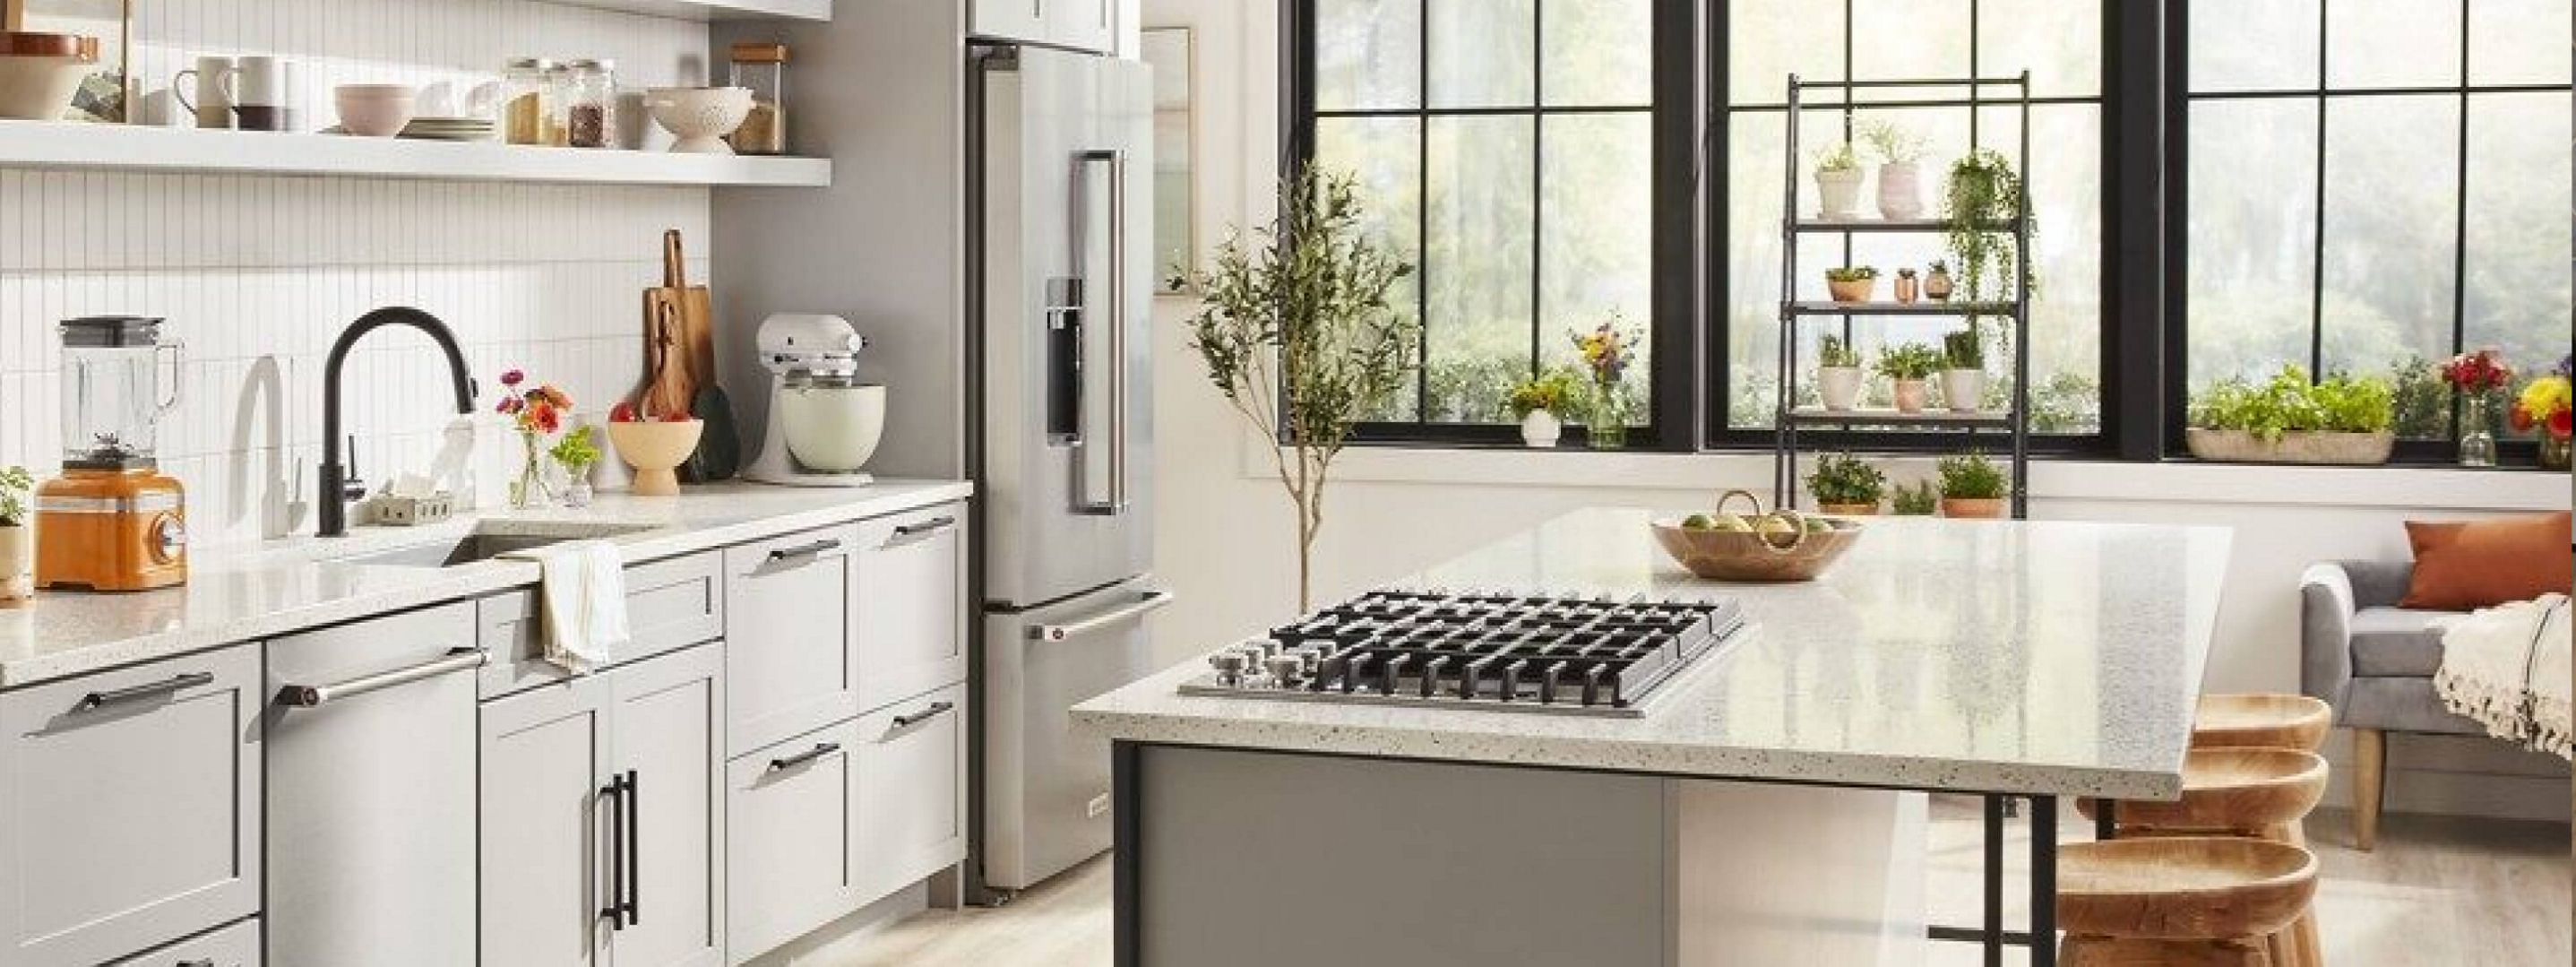 Stevenson Afsnit Svaghed Kitchen Appliances to Bring Culinary Inspiration to Life | KitchenAid